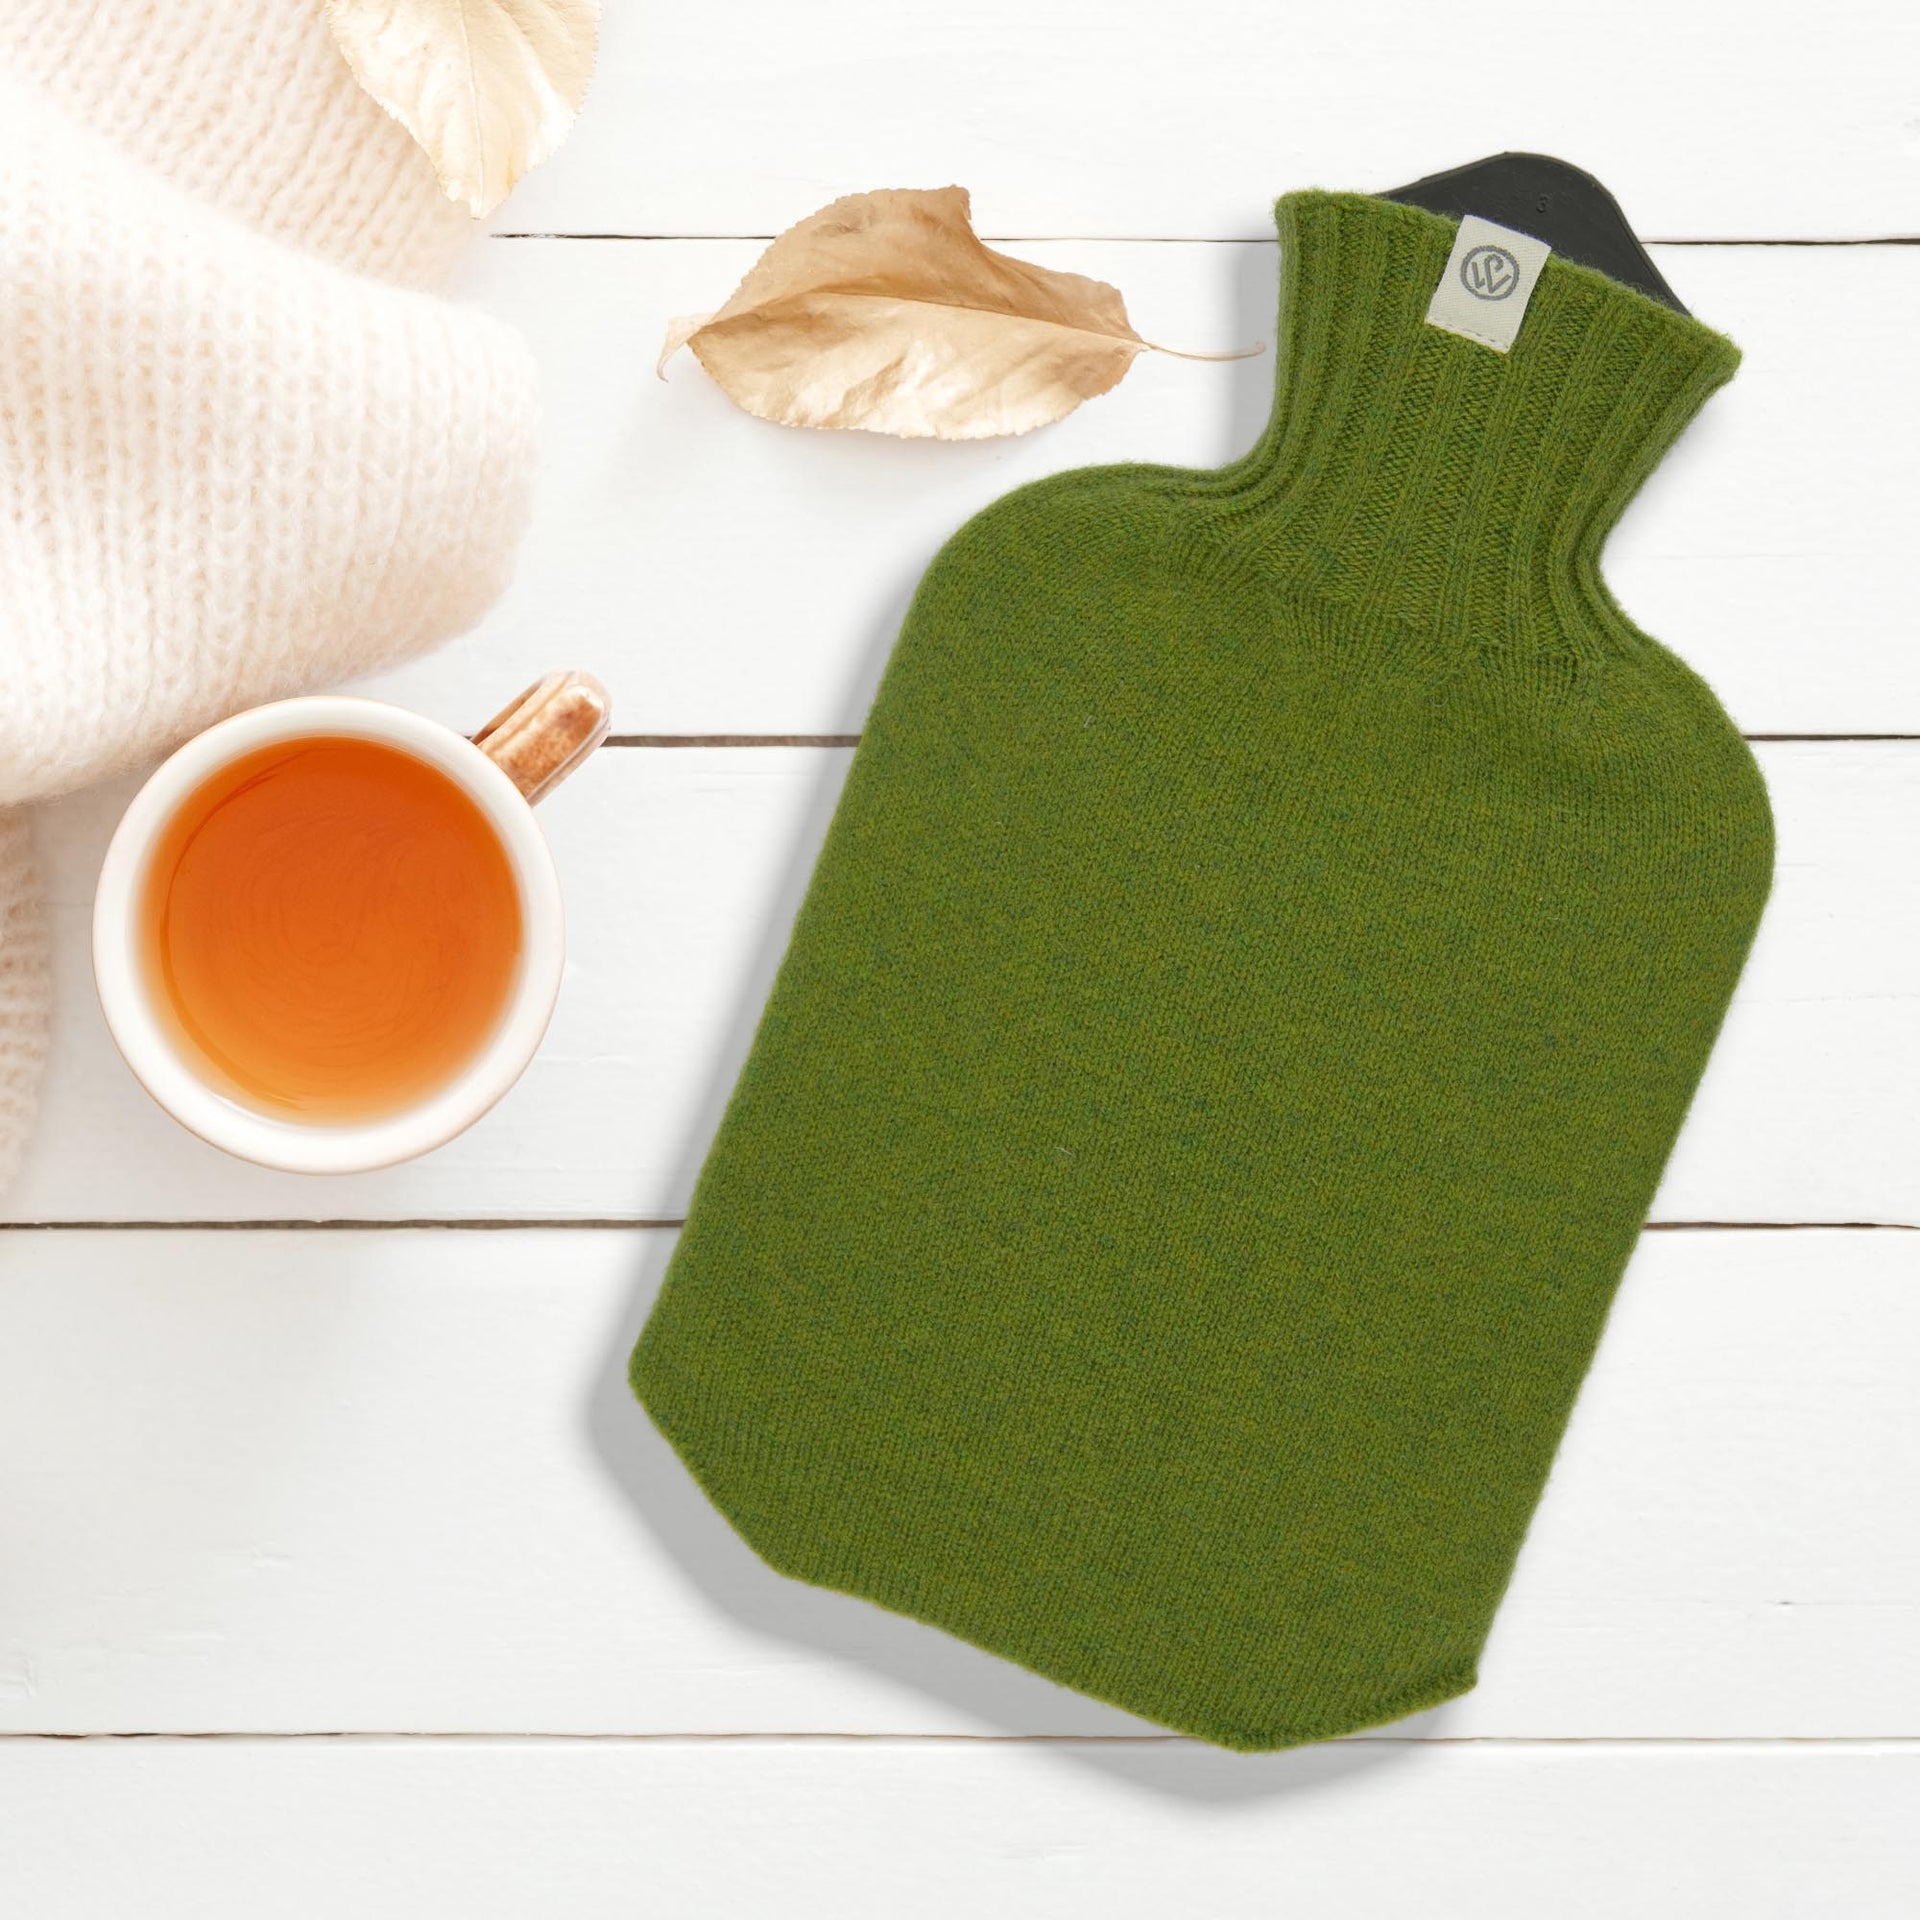 Lambswool Knit Mini Sustainable Hot Water Bottle Moss Green - Made Scotland